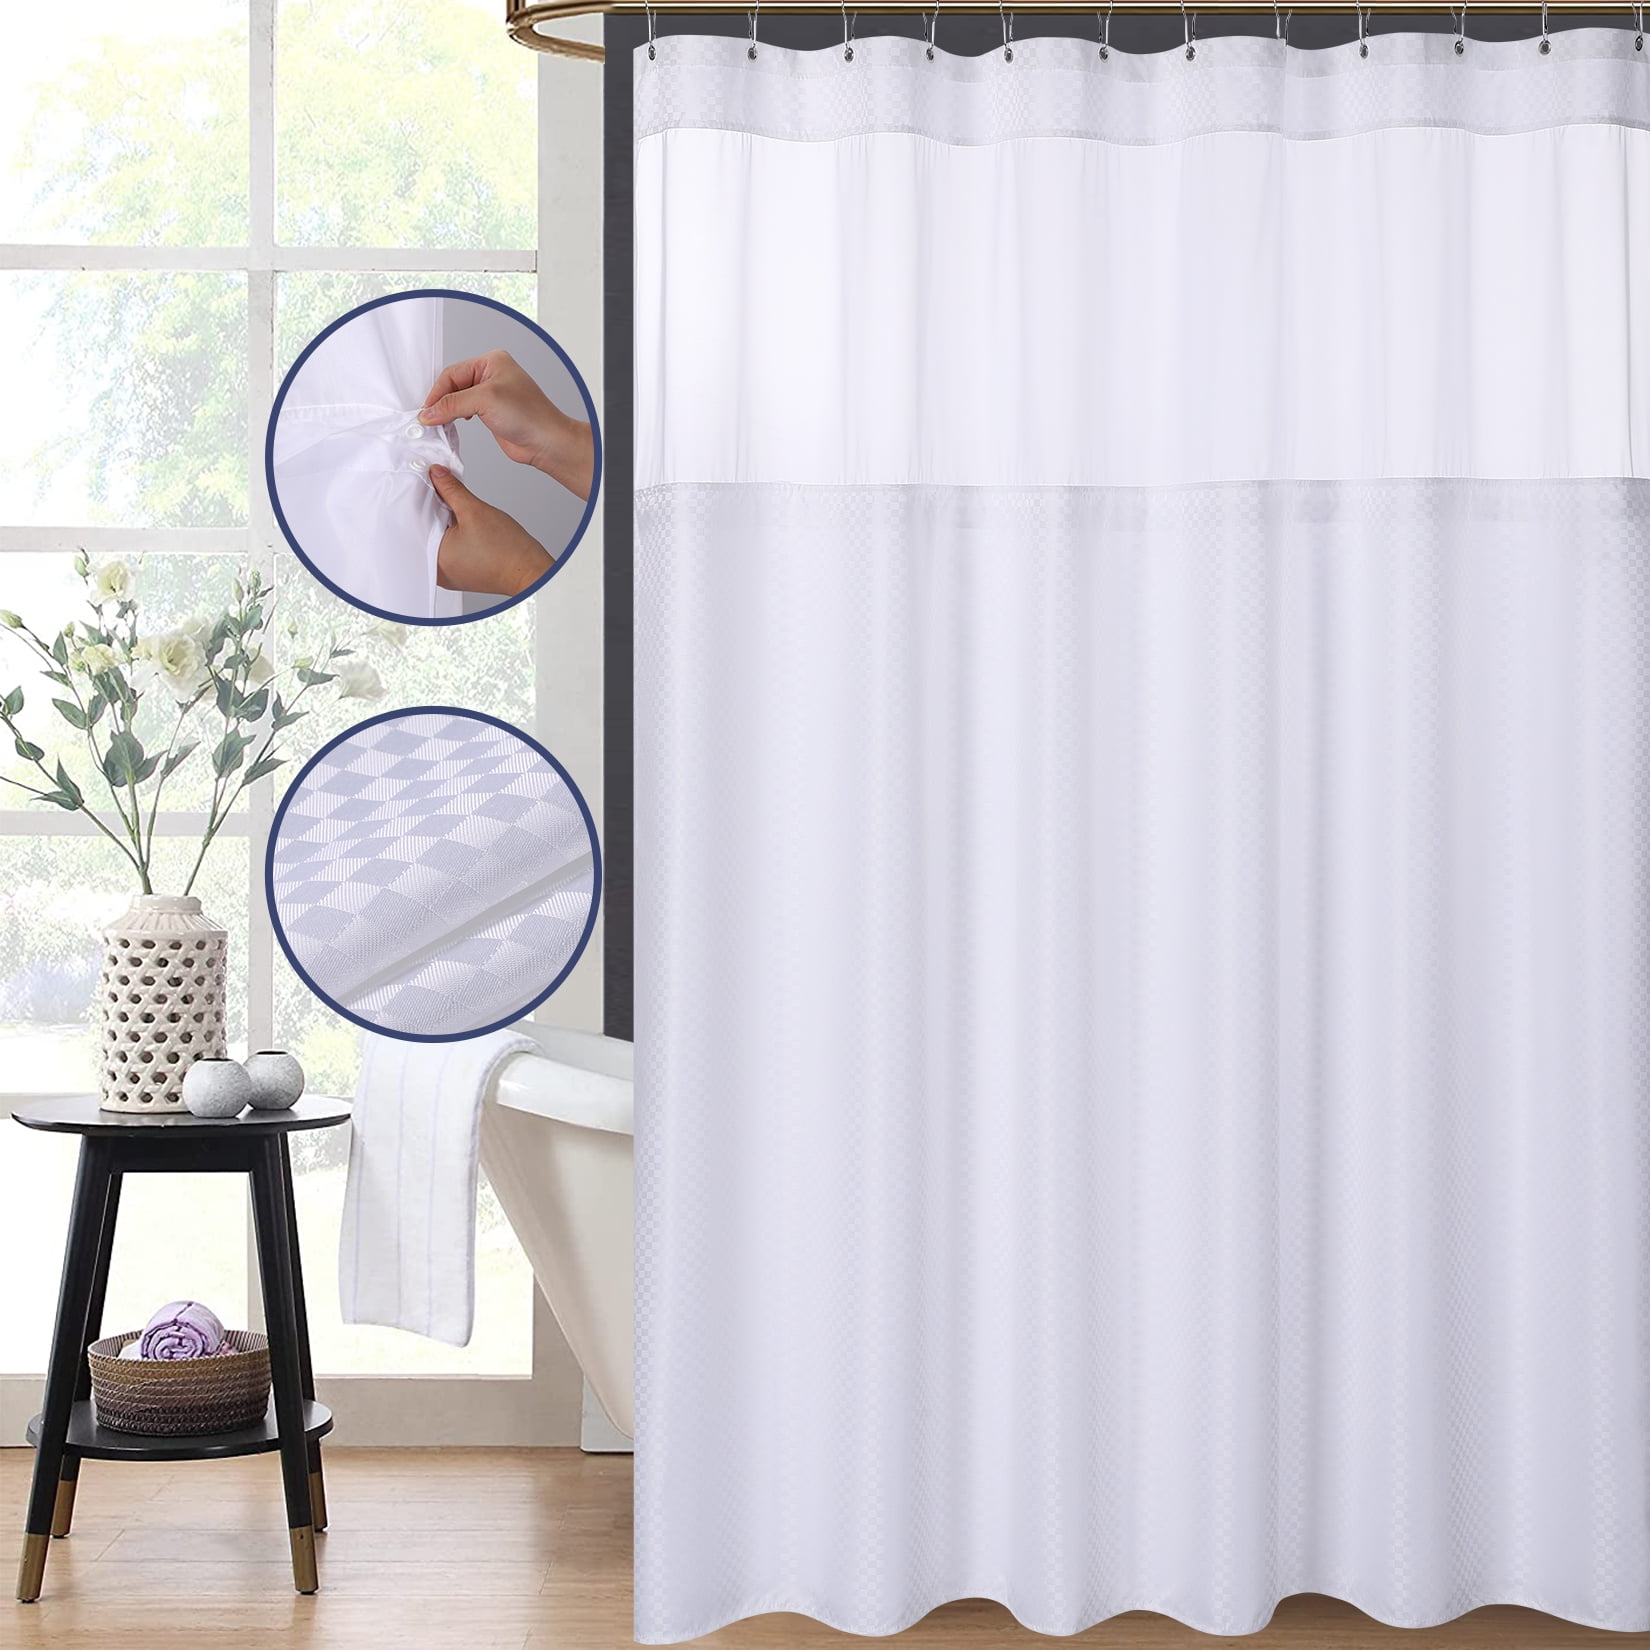 Dark Gray Details about   Lagute HS-101 SnapHook Shower Curtain with Translucent Peva Liner 